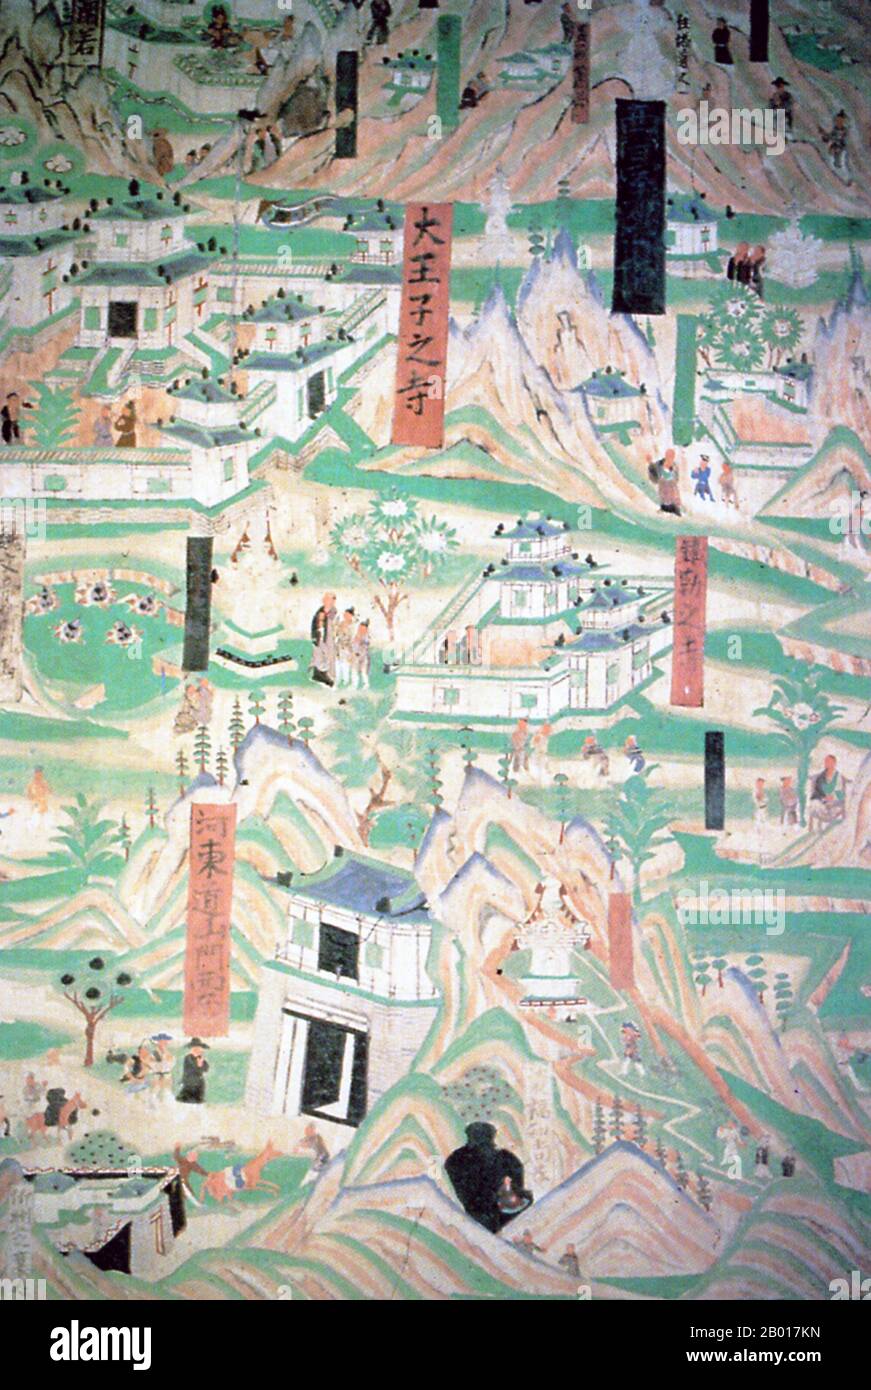 China: Mural depicting the Buddhist pilgrimage site at Mount Wutai, Shanxi. From the Mogao Caves, Dunhuang, 10th century CE.  Mount Wutai (Chinese: Wǔtái Shān; literally 'Five Plateau Mountai'), also known as Wutai Mountain or Qingliang Shan, located in Shanxi, China, is one of the Four Sacred Mountains in Chinese Buddhism. The mountain is home to many of China's most important monasteries and temples. Mount Wutai's cultural heritage consist of 53 sacred monasteries, and they were inscribed as a UNESCO World Heritage Site in 2009. Stock Photo